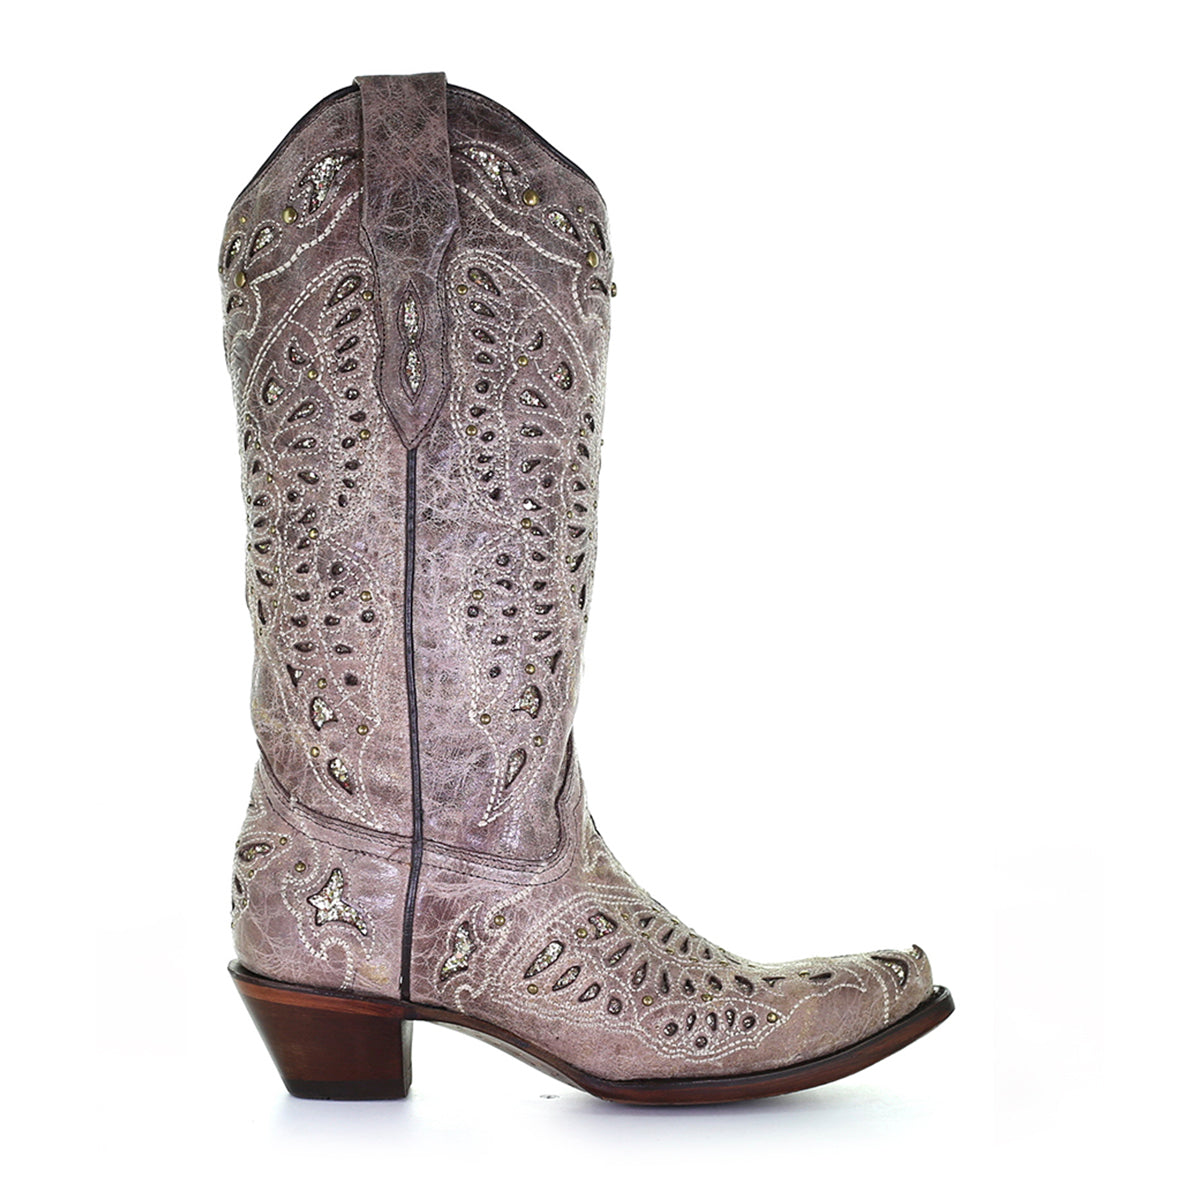 Corral | Glitter Butterfly Inlay & Embroidery | Snip Toe | Light Brown